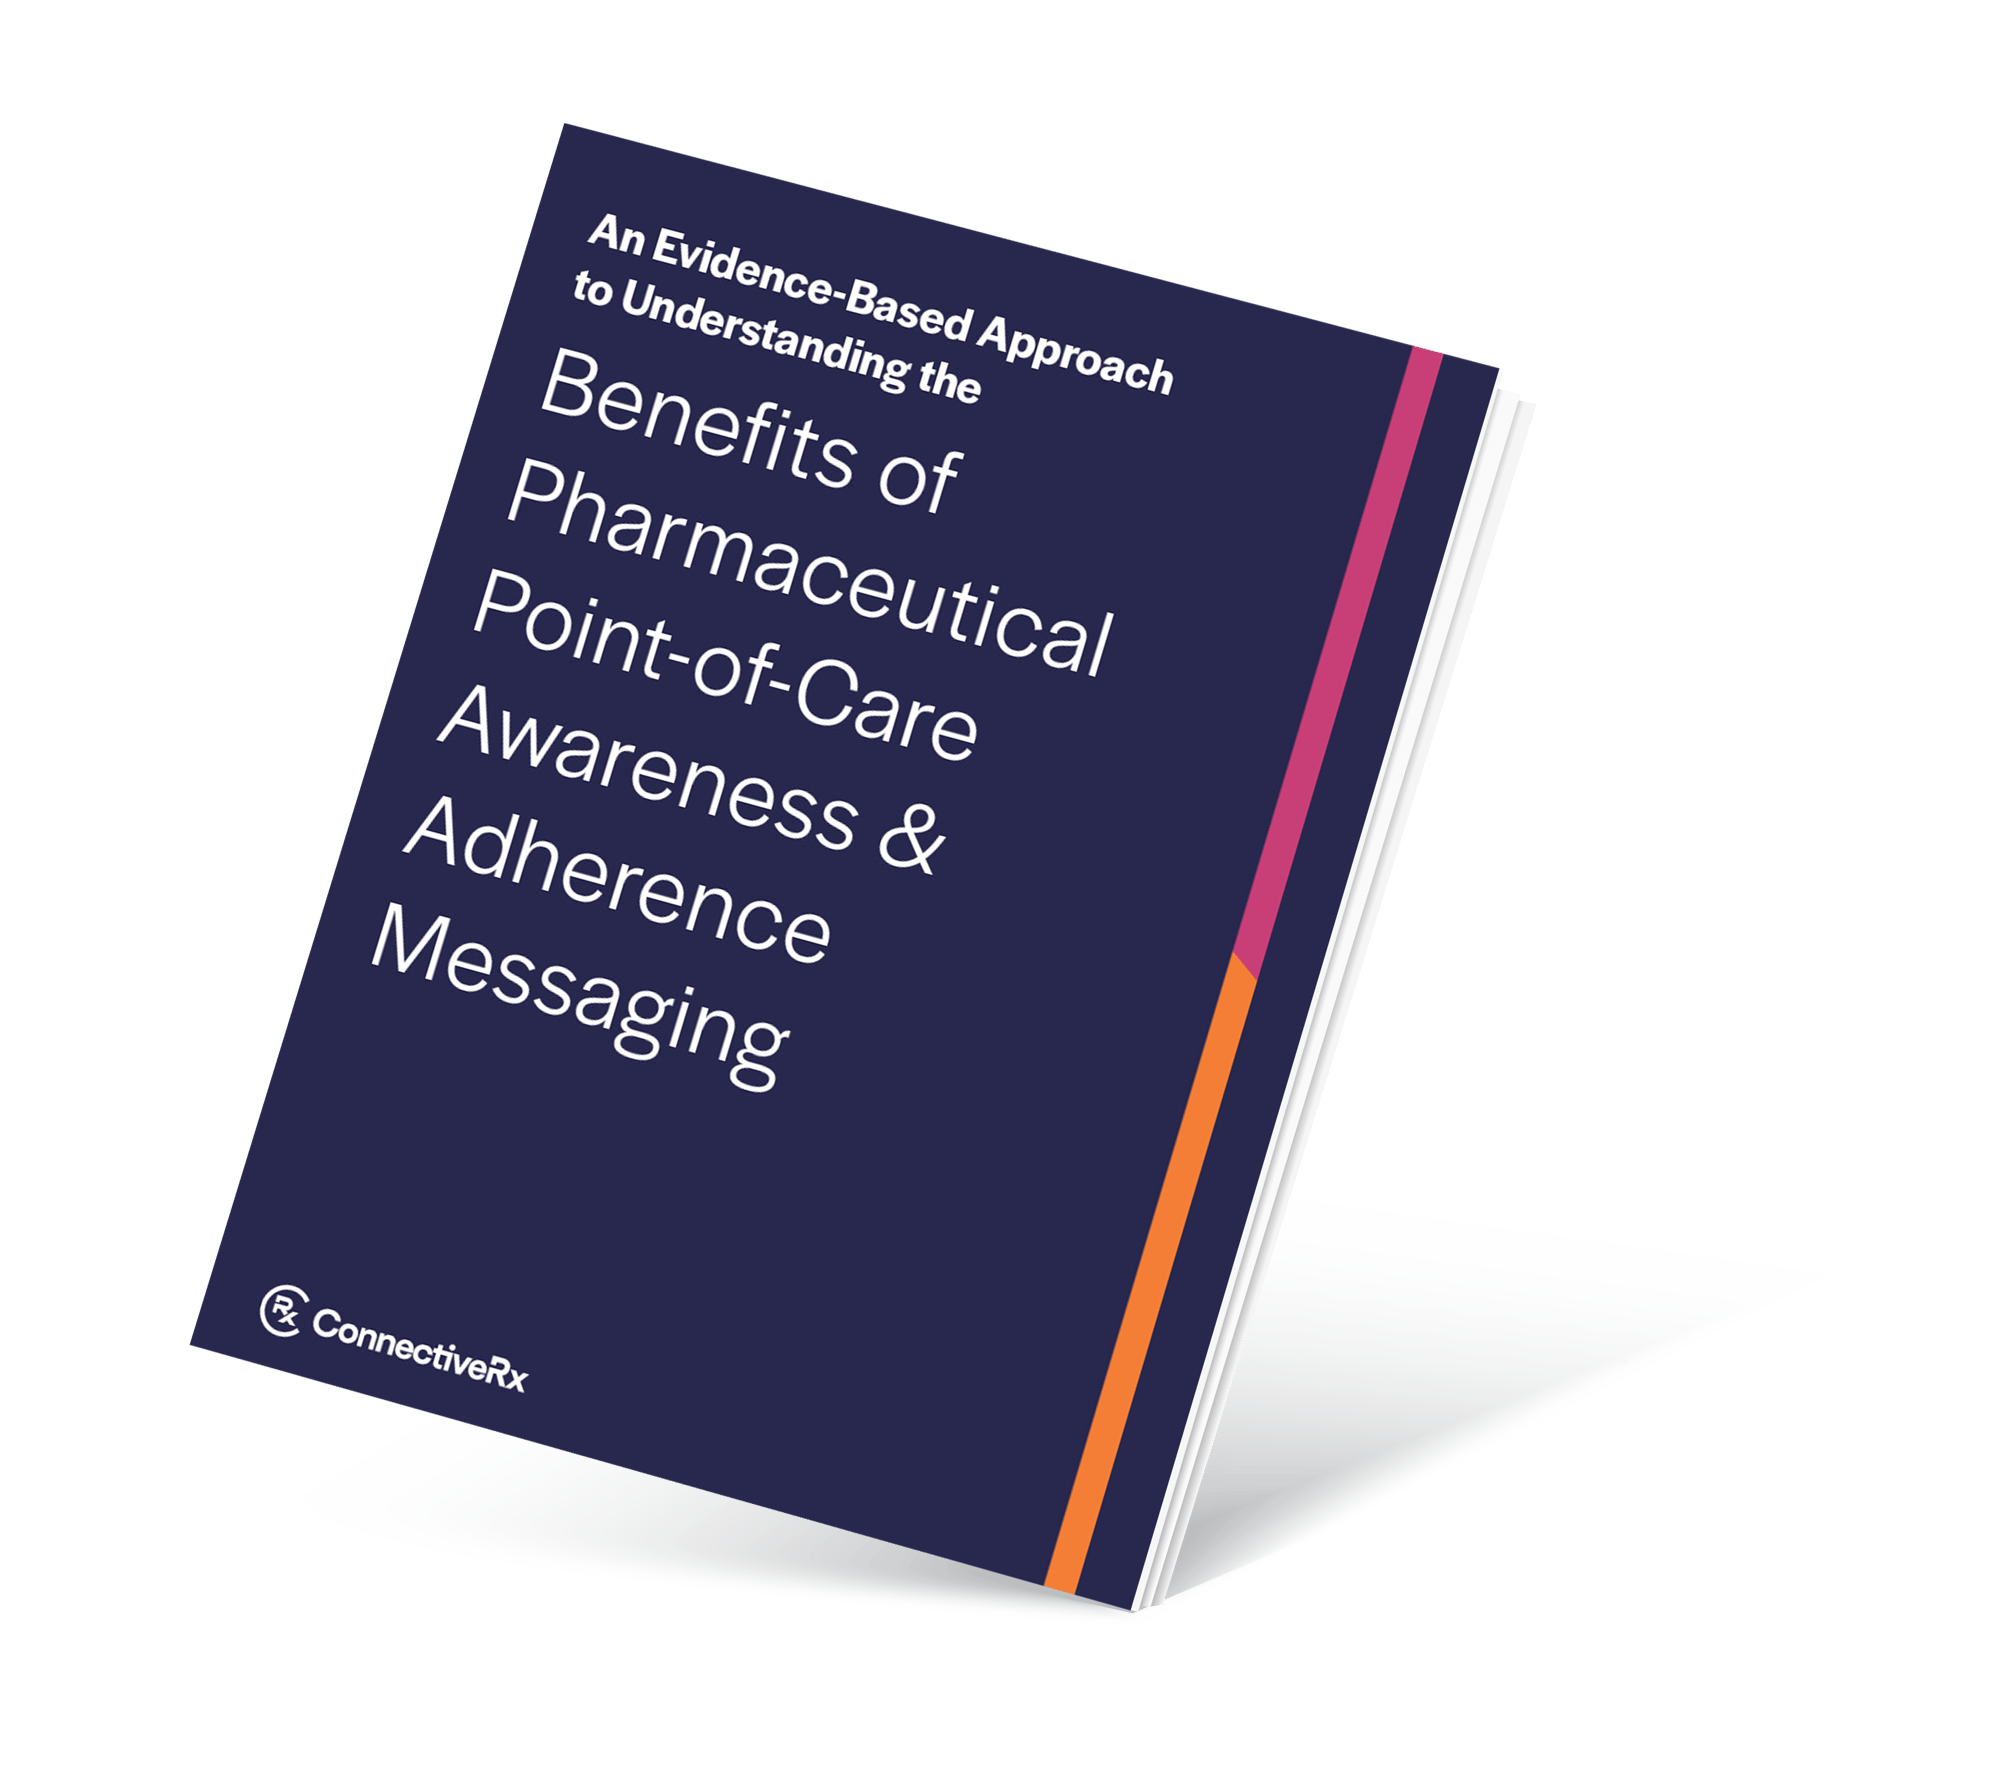 The cover of ConnectiveRx's Benefits of Pharmaceutical Point-of-Care Awareness & Adherence Messaging whitepaper.